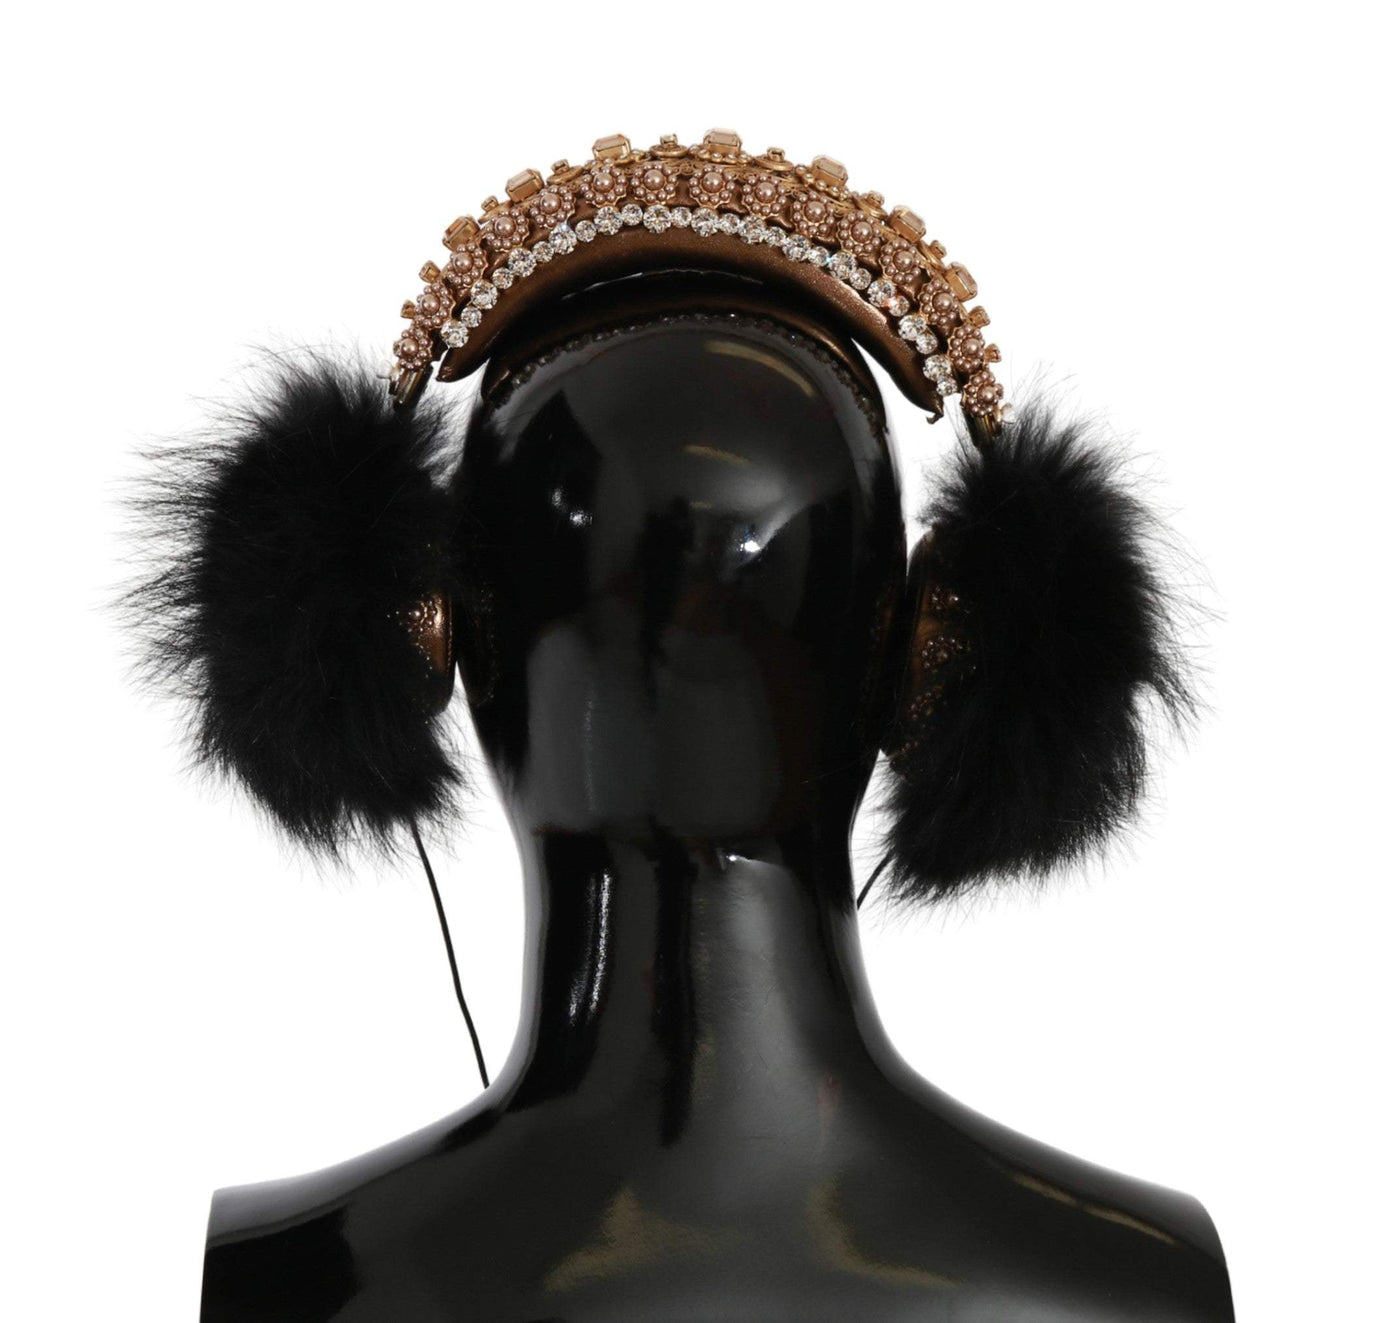 Dolce & Gabbana Gold Black Crystal Fur Headset Audio Headphones #women, Accessories - New Arrivals, Dolce & Gabbana, feed-agegroup-adult, feed-color-Black, feed-gender-female, Gold Black, Other - Women - Accessories at SEYMAYKA